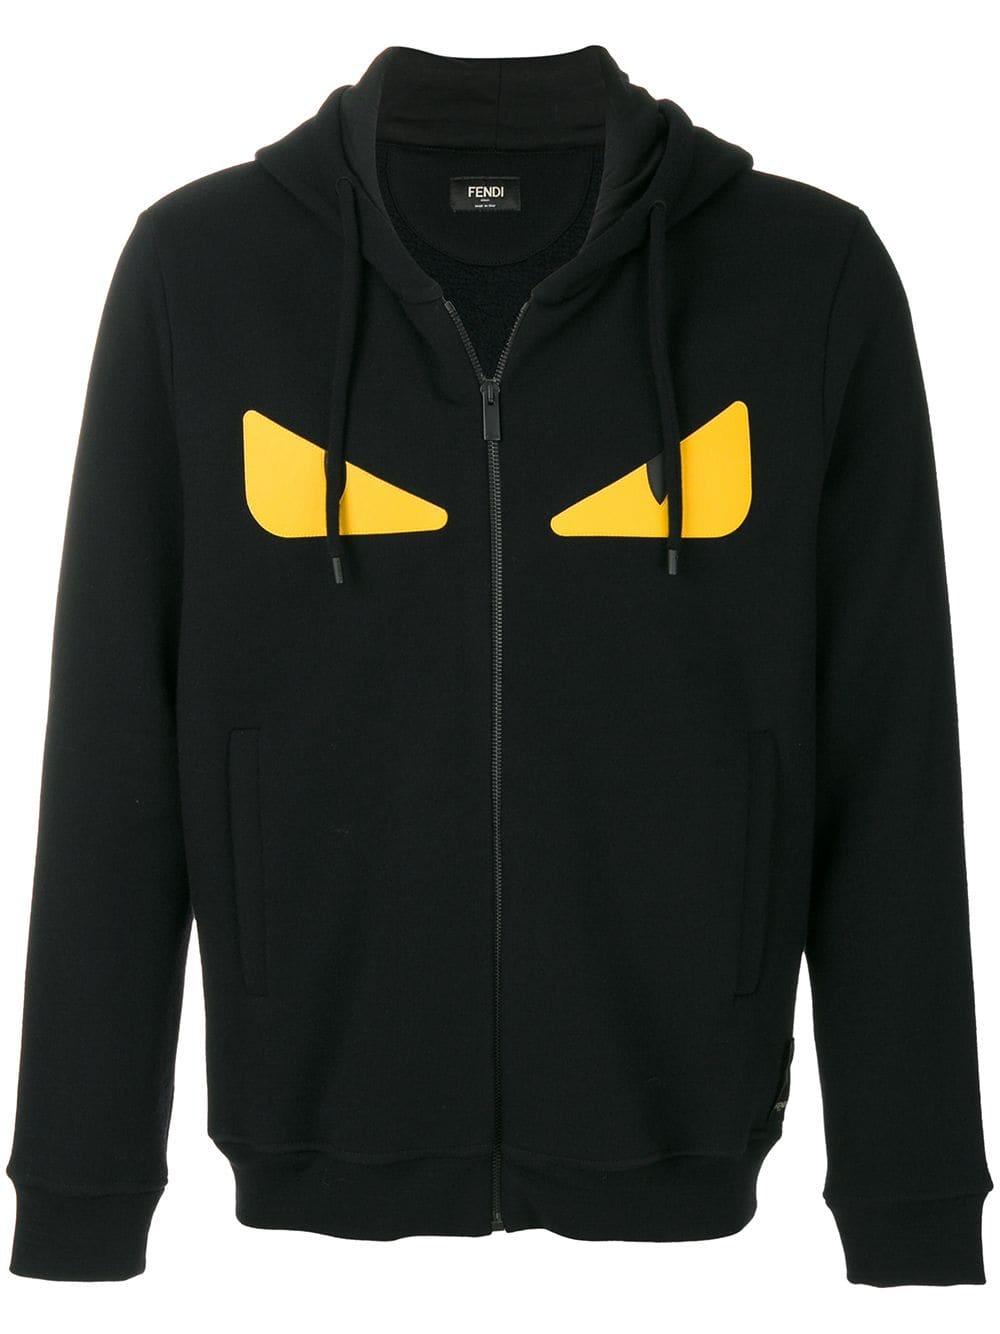 Fendi Cotton Bad Bugs Zipped Hoodie in Black for Men - Save 20% - Lyst